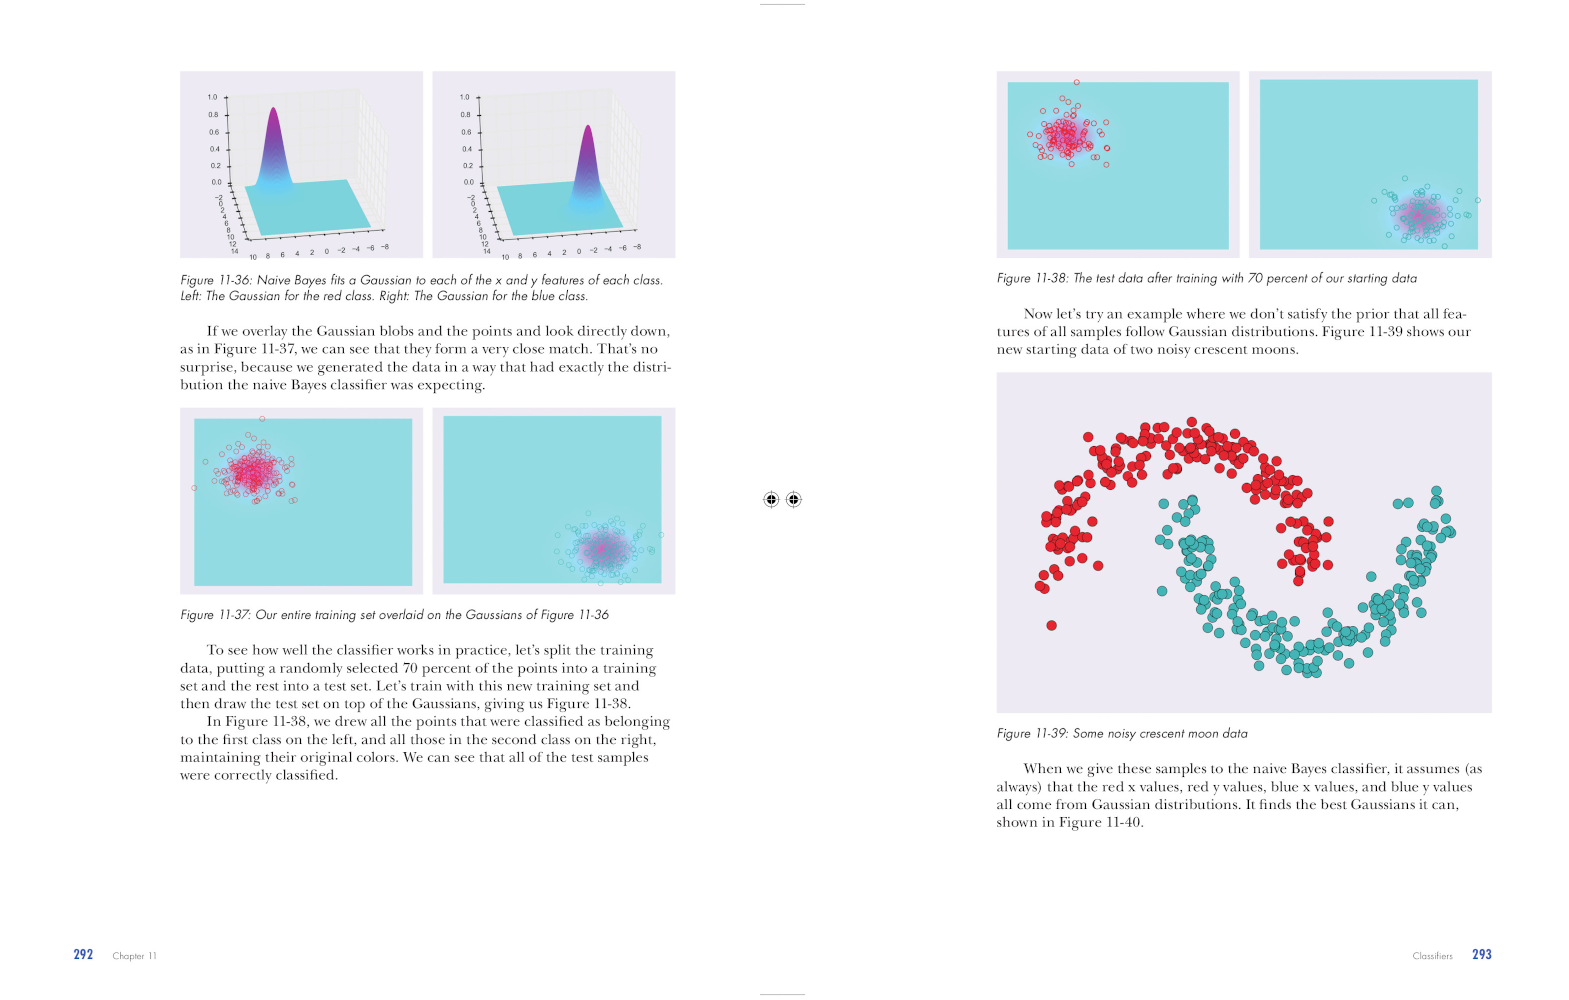 Deep Learning: A Visual Approach pages 292-293